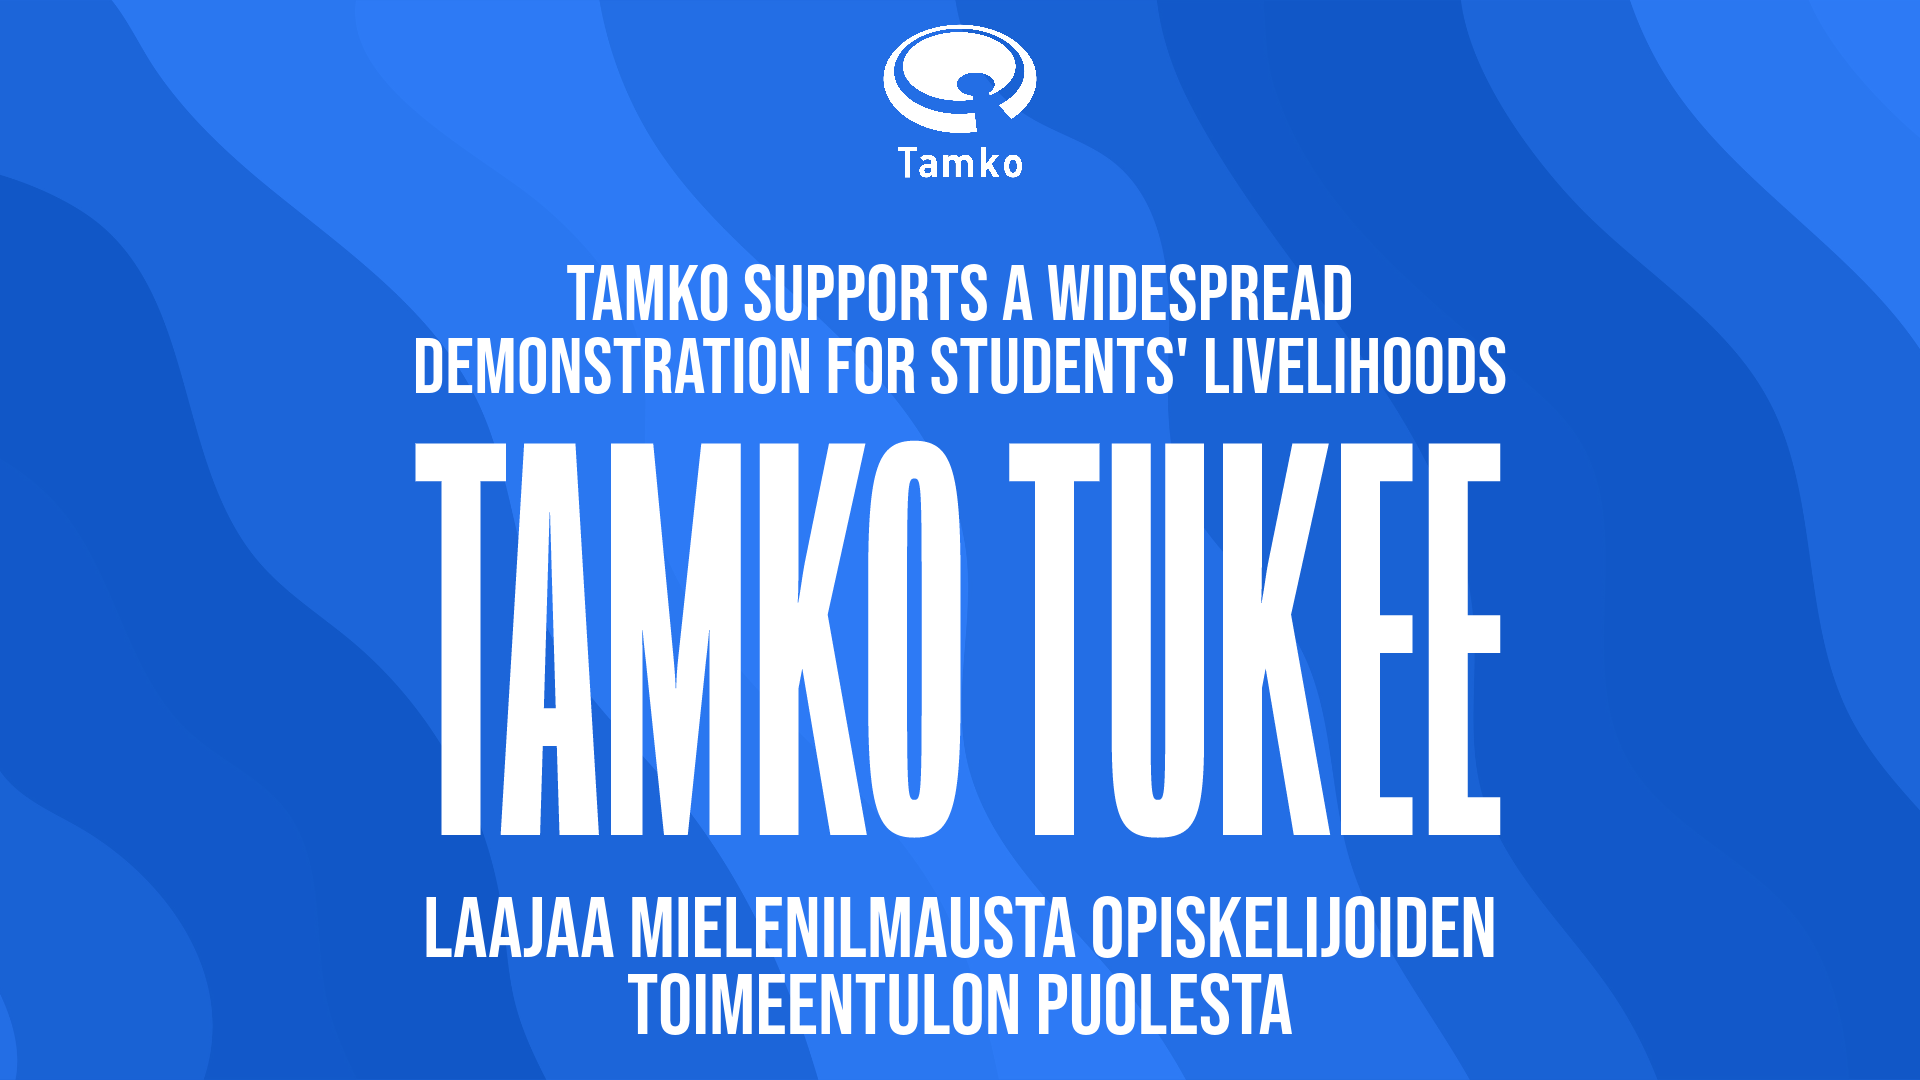 Tamko supports a widespread demonstration for students’ livelihoods